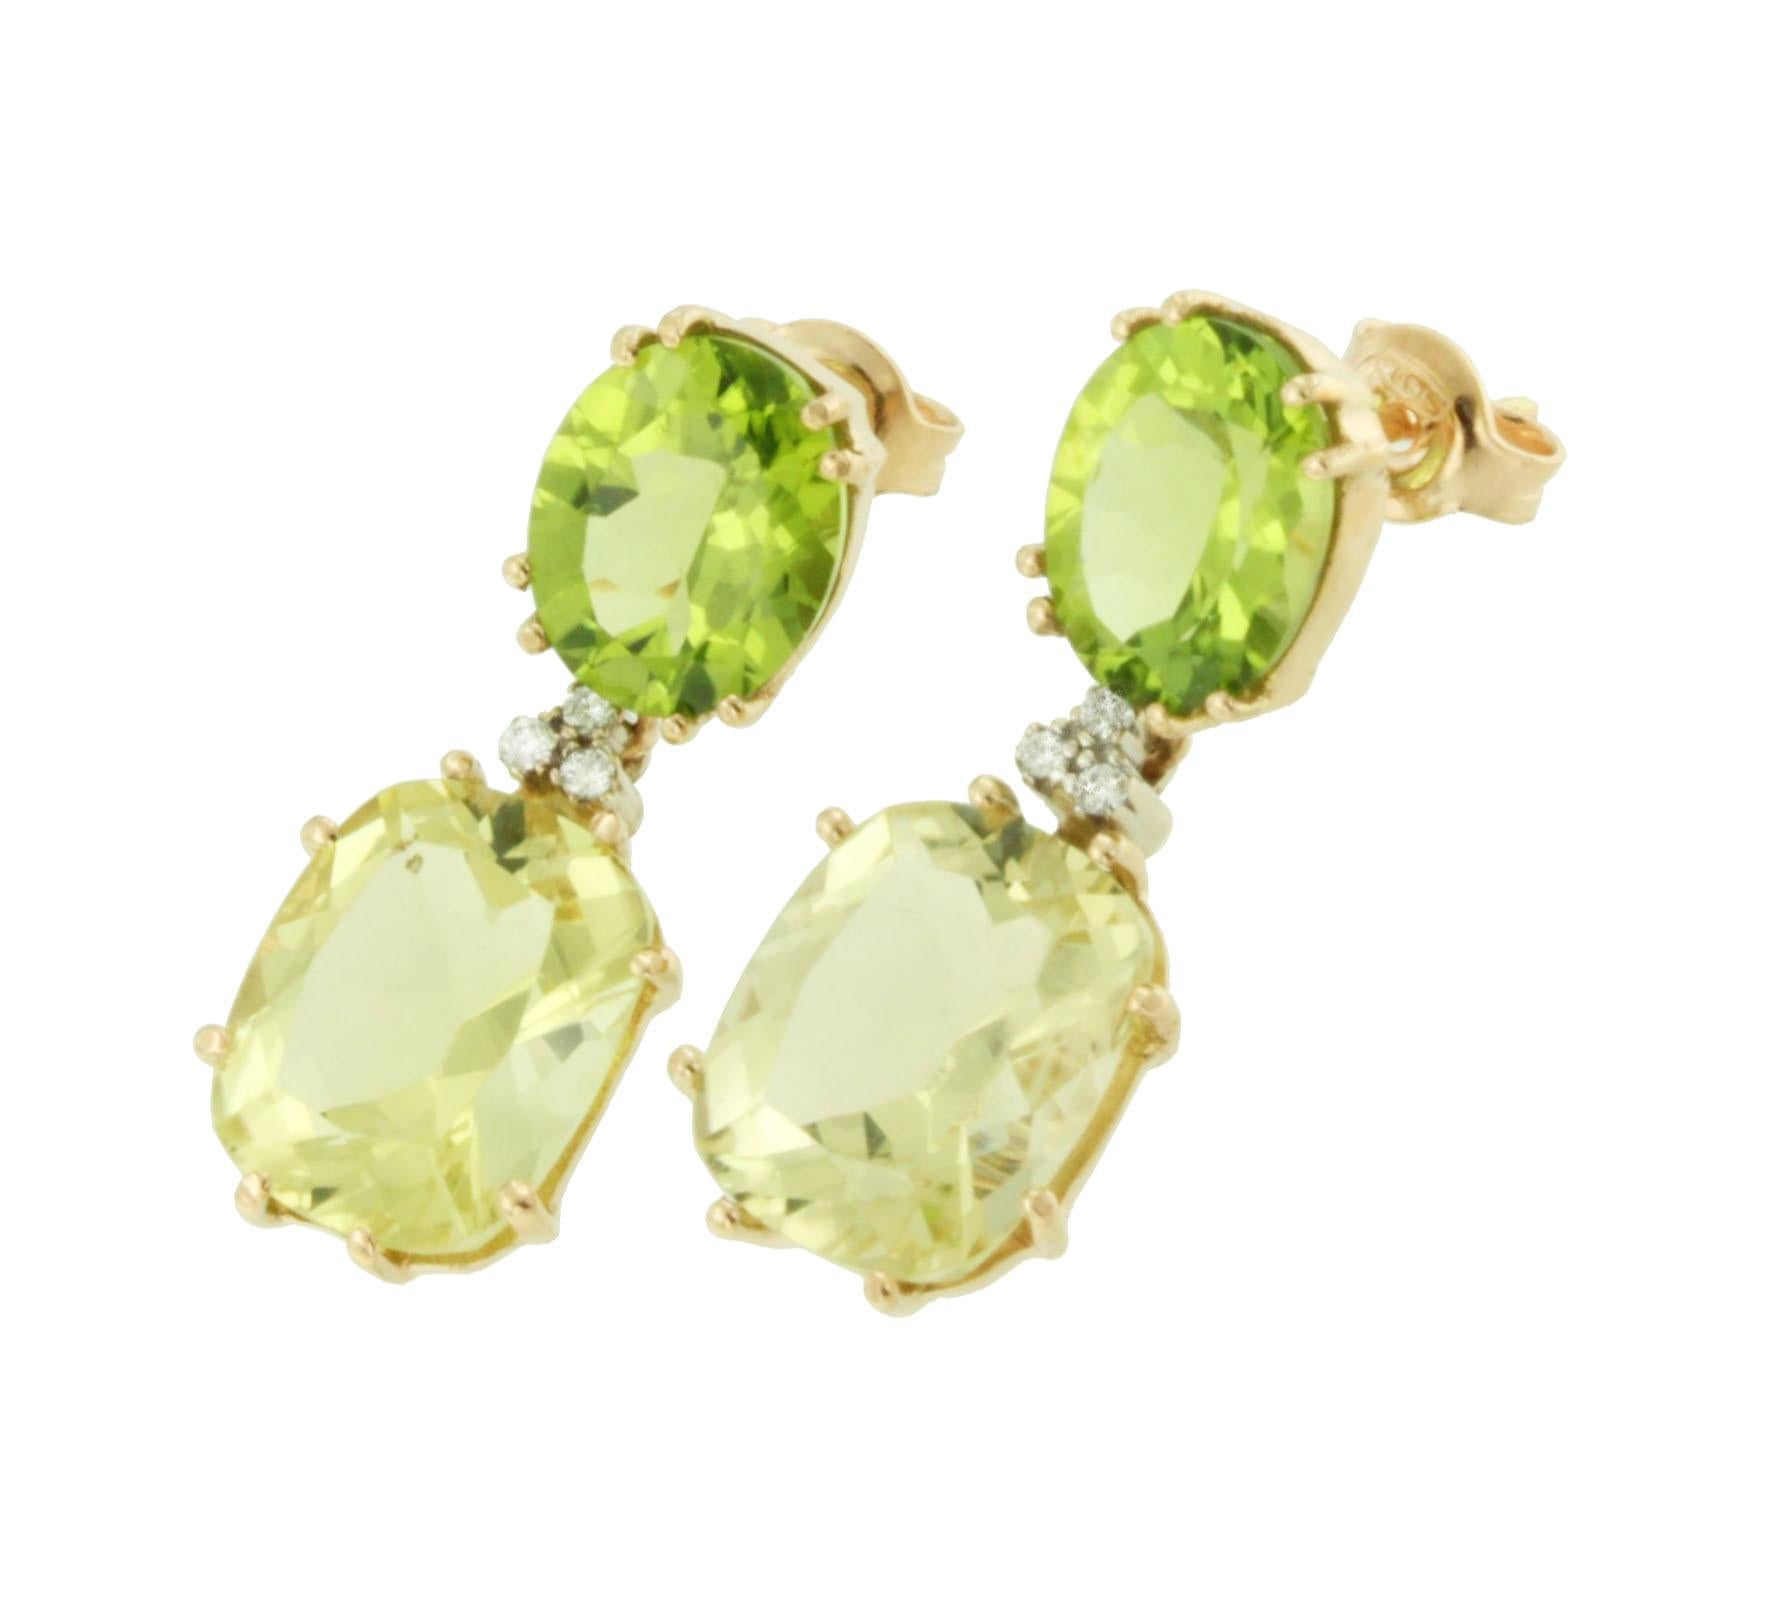 Combination of shapes and light colors made a unique fashion and modern amazing earrings in 18k rose gold with delicate green Peridoto (oval cut, size: 8x10 mm), Lemon Quartz (antique cut, size: 10x12 mm) and white Diamonds cts 0.06. Made in Italy